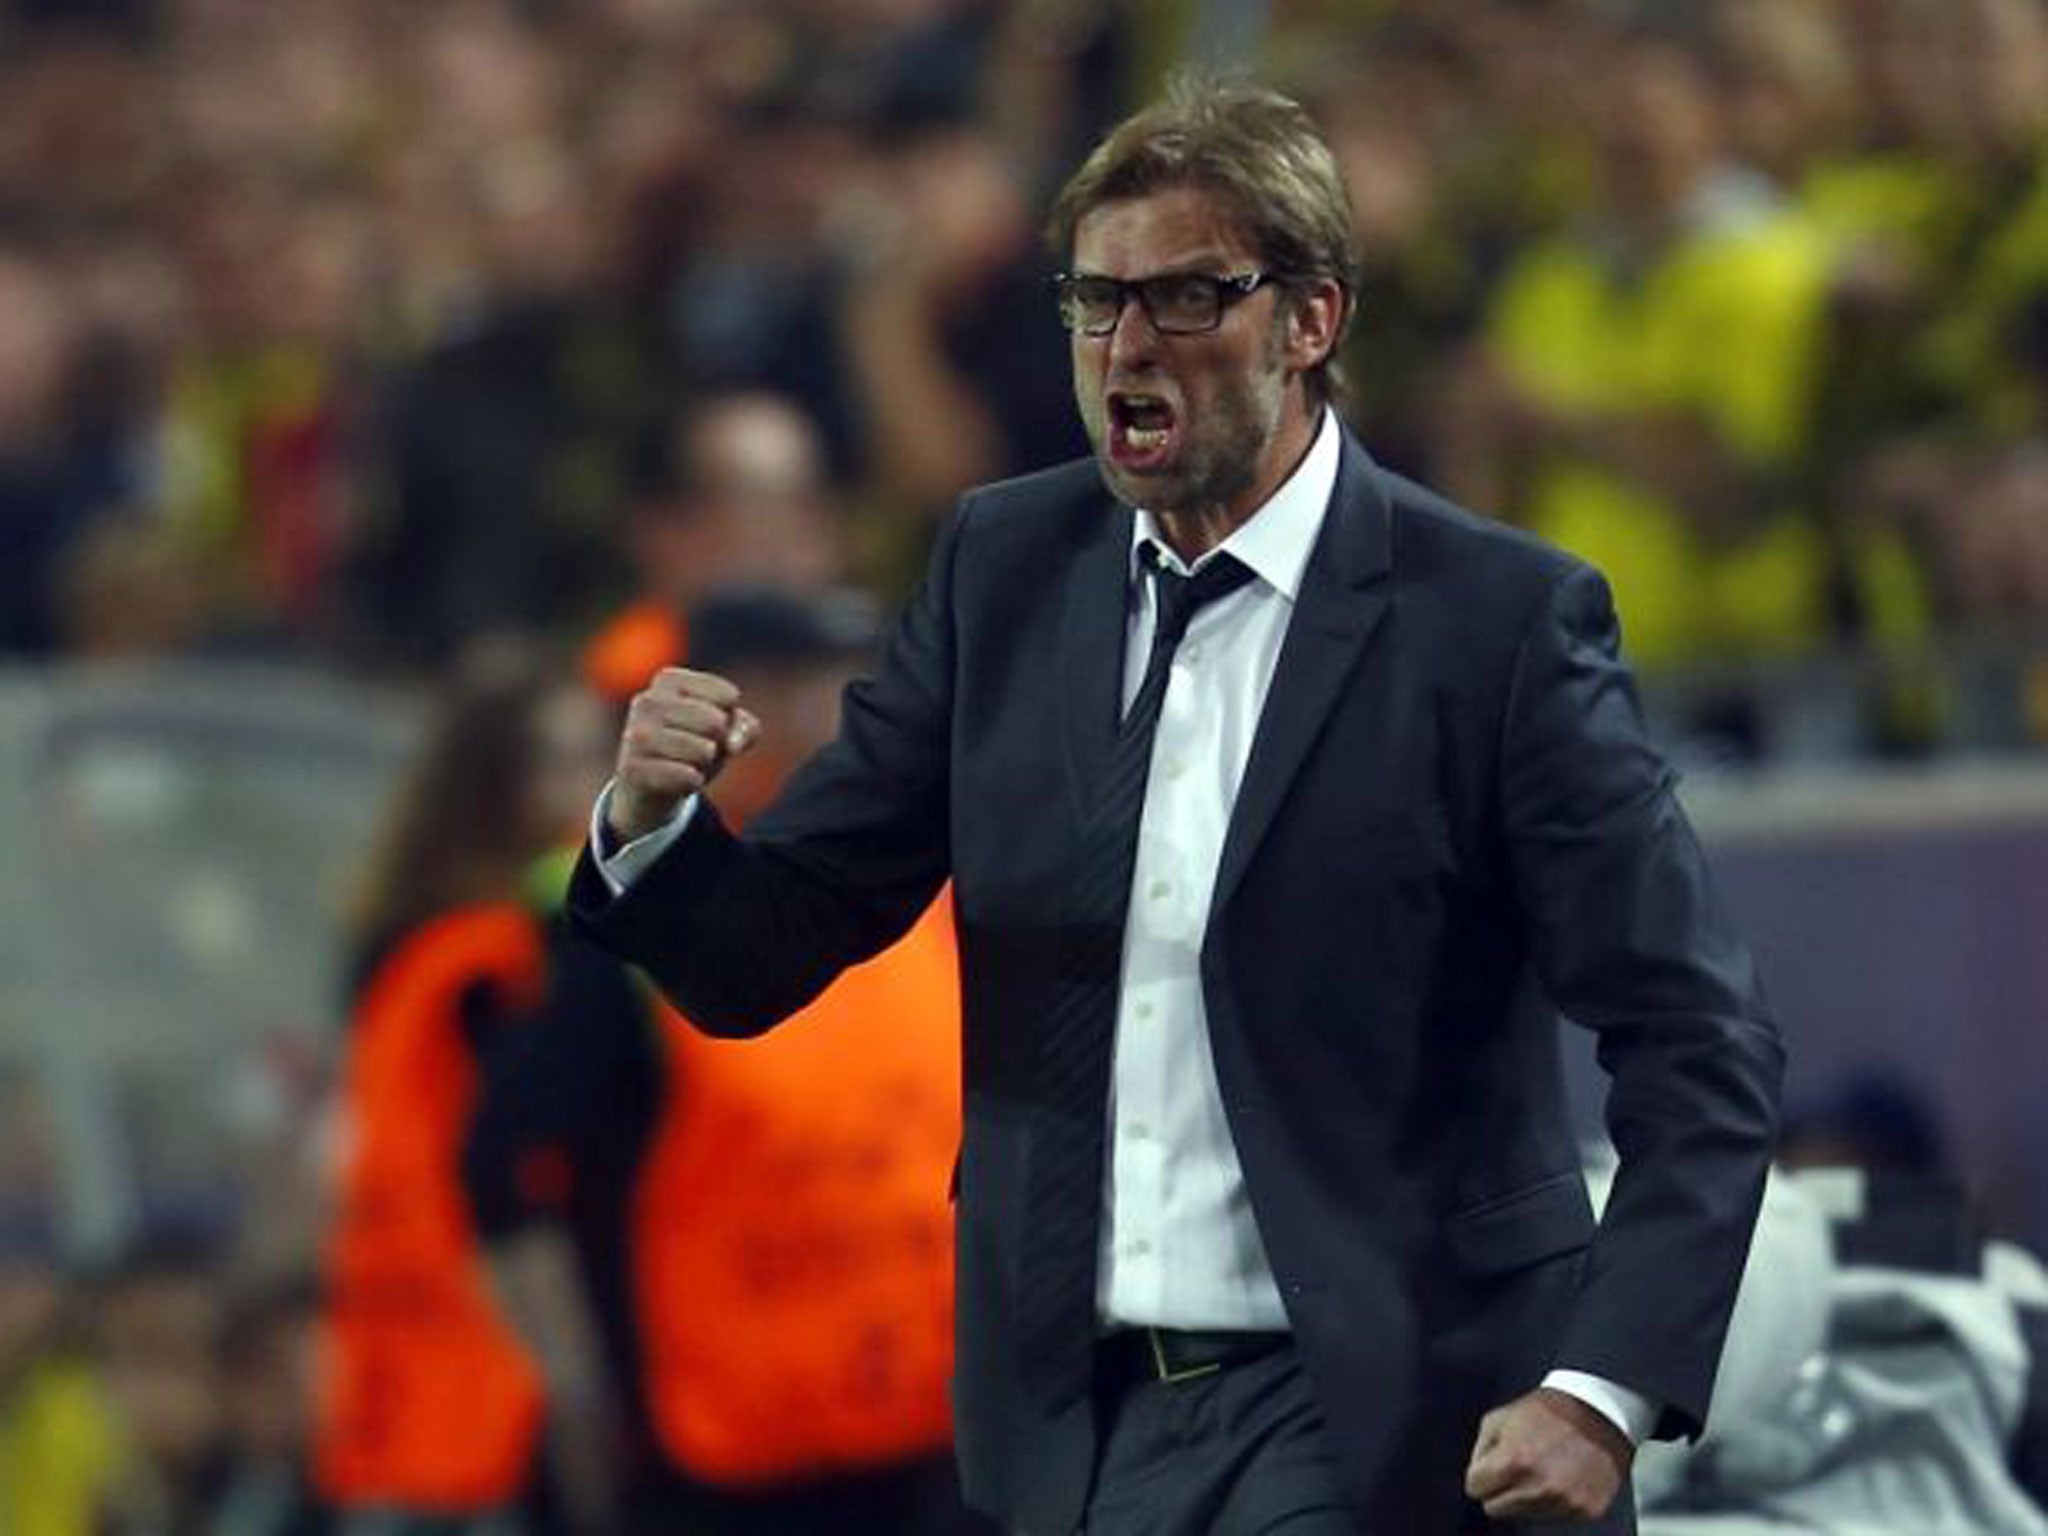 Klopp’s calm over Götze’s loss is more cause to laud Germans